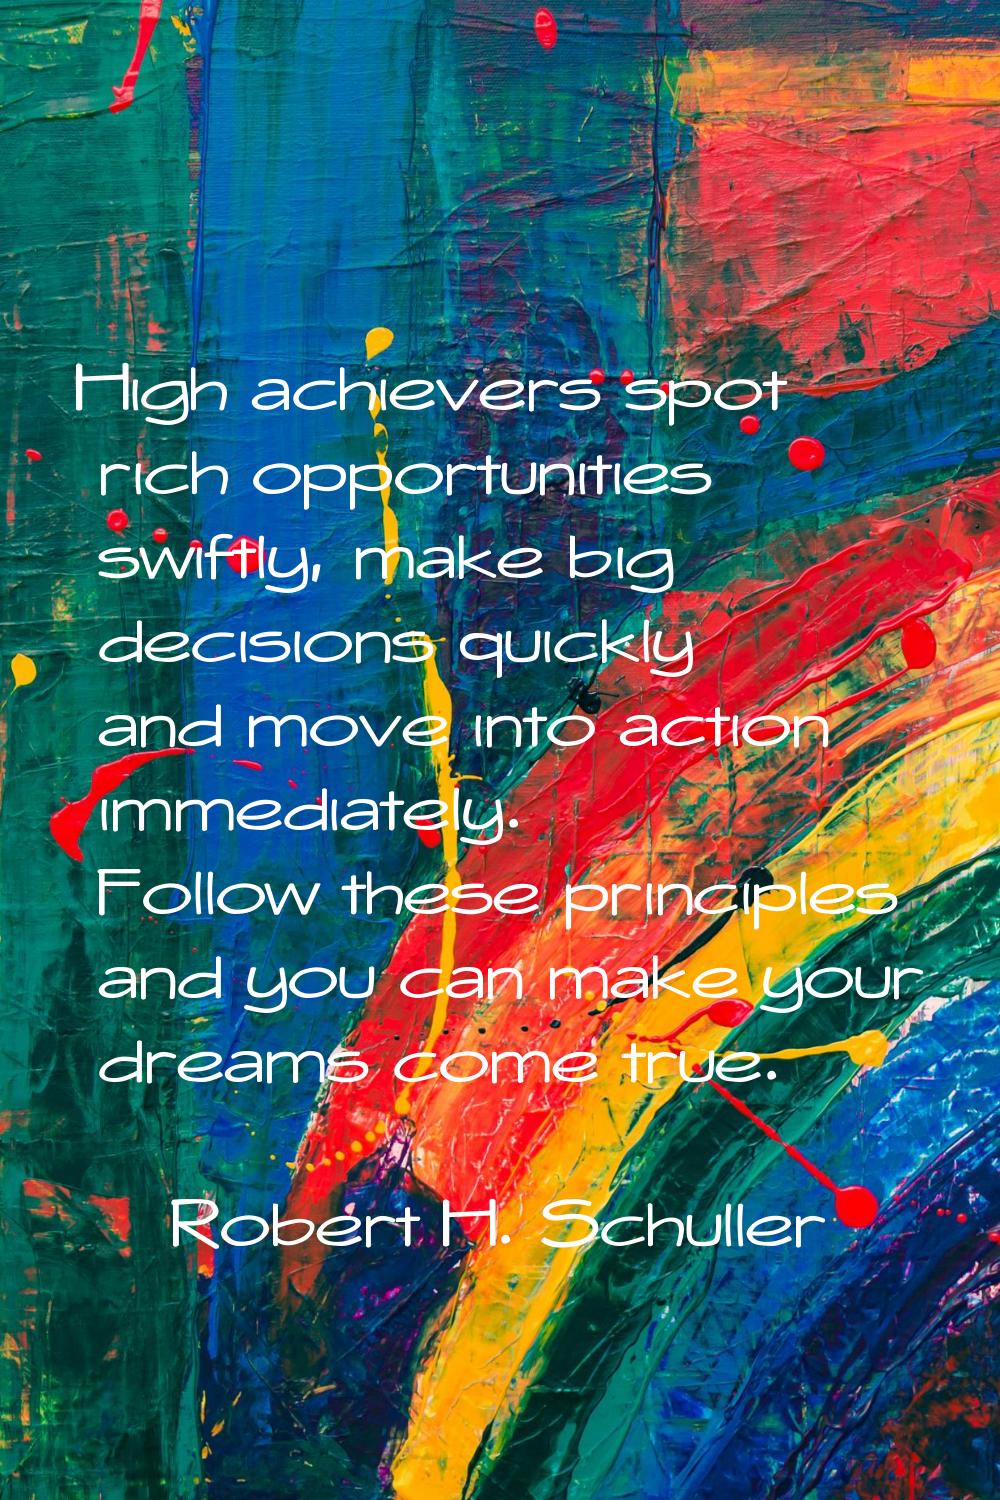 High achievers spot rich opportunities swiftly, make big decisions quickly and move into action imm